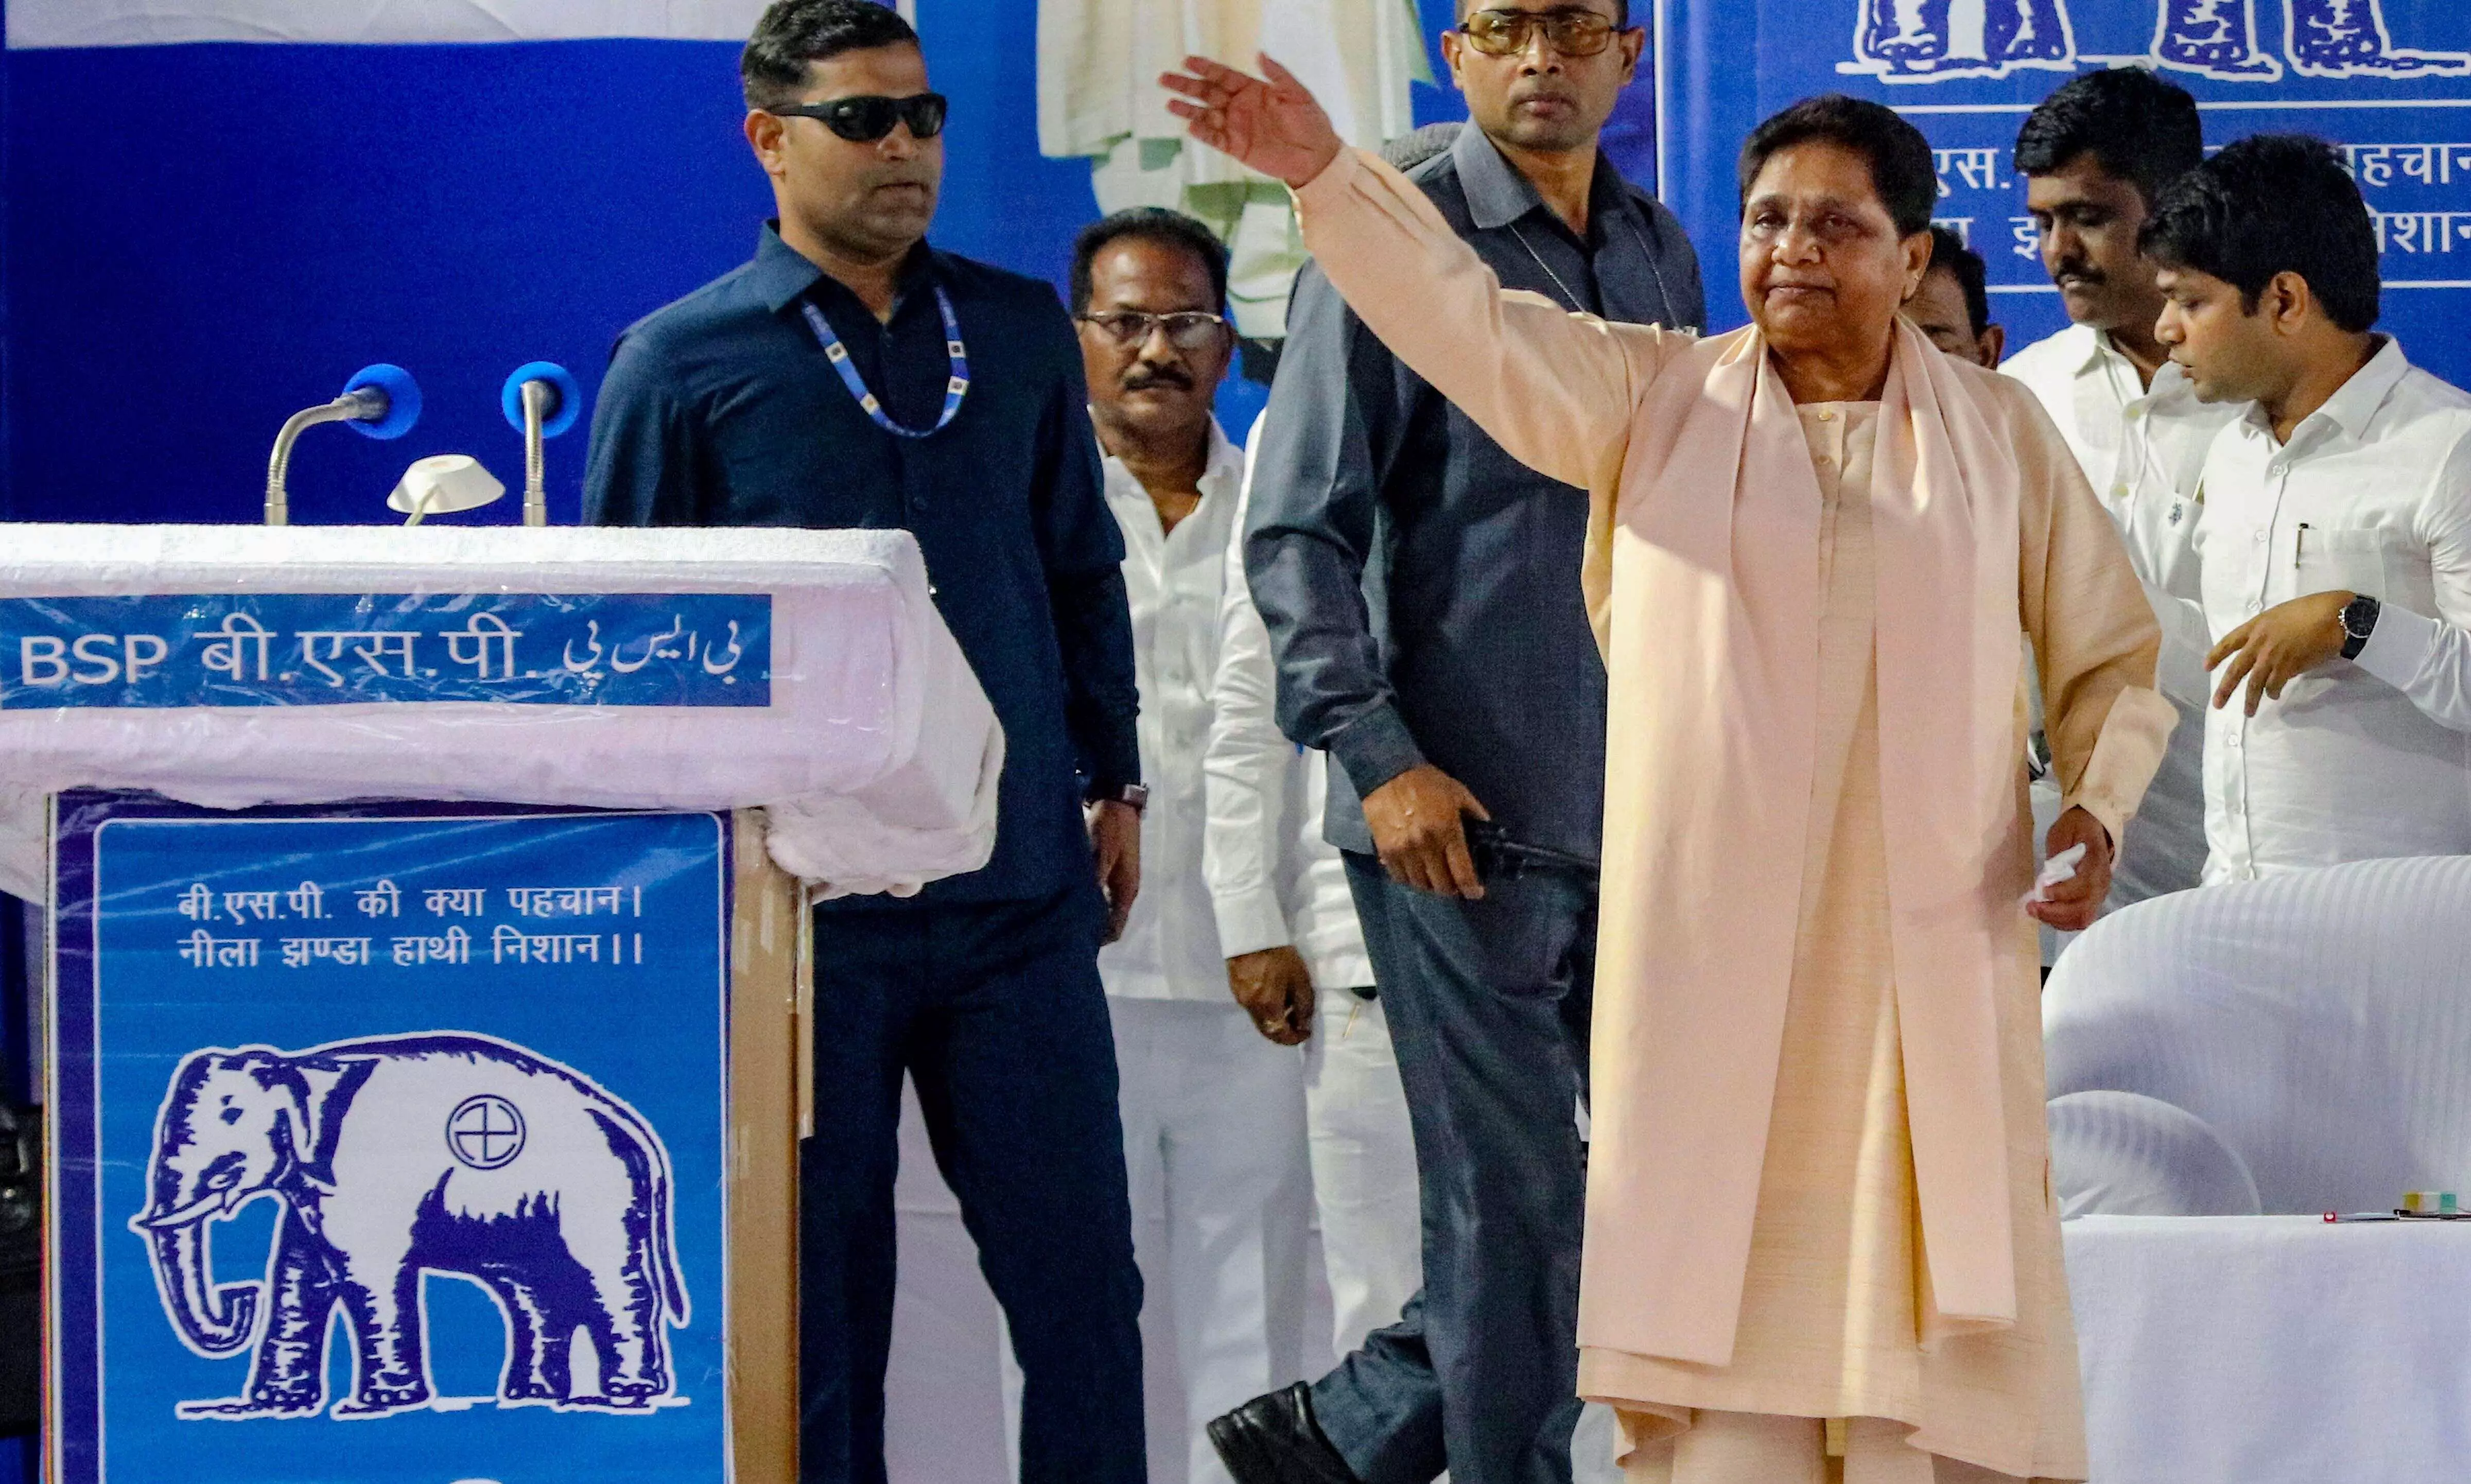 BSP releases fifth list of candidates for LS elections